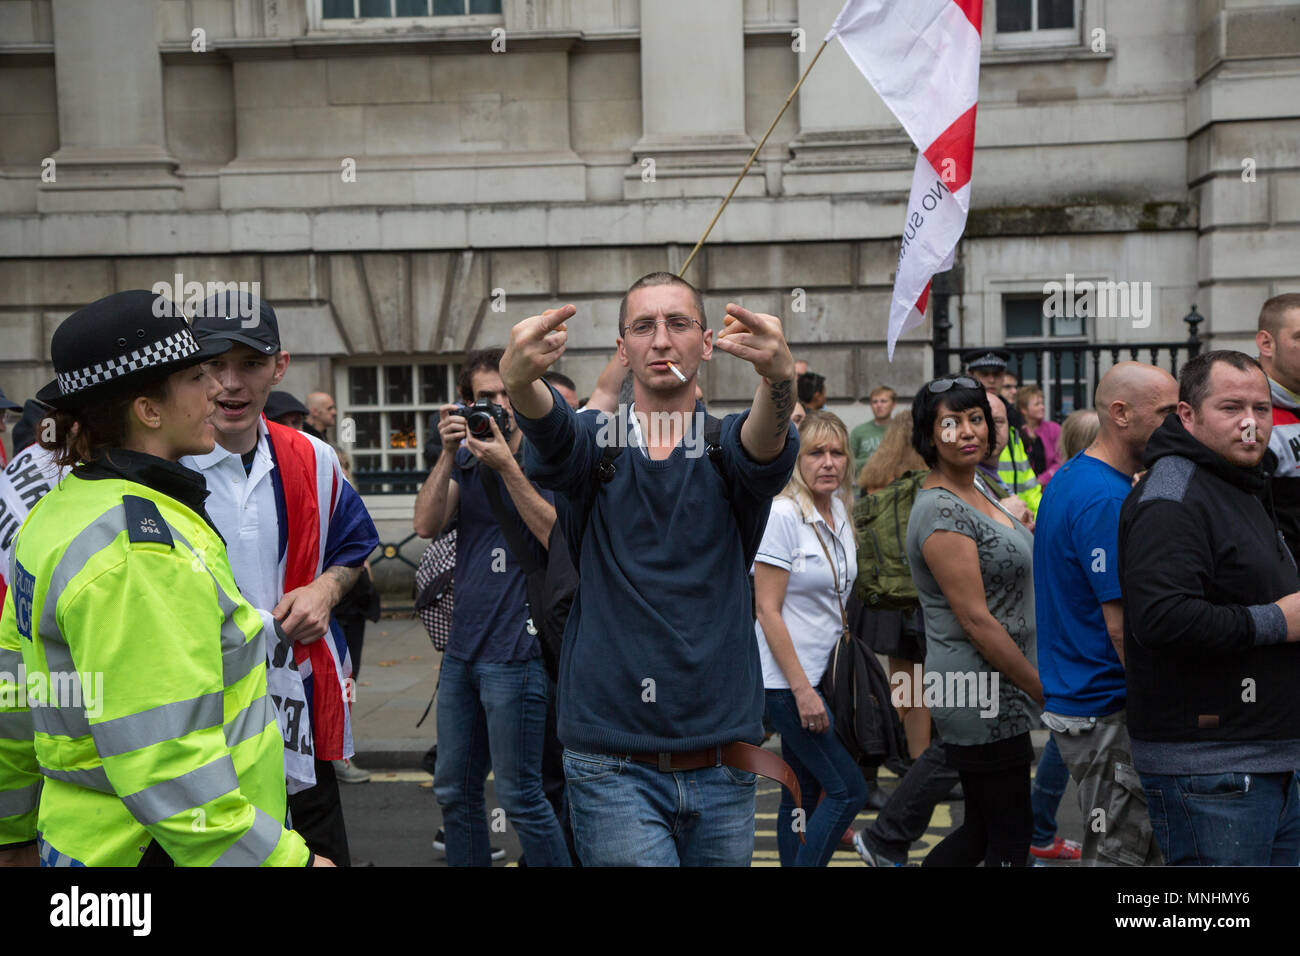 A man sticking his fingers up during an EDL march in Whitehall is told to stop by a female police officer Stock Photo